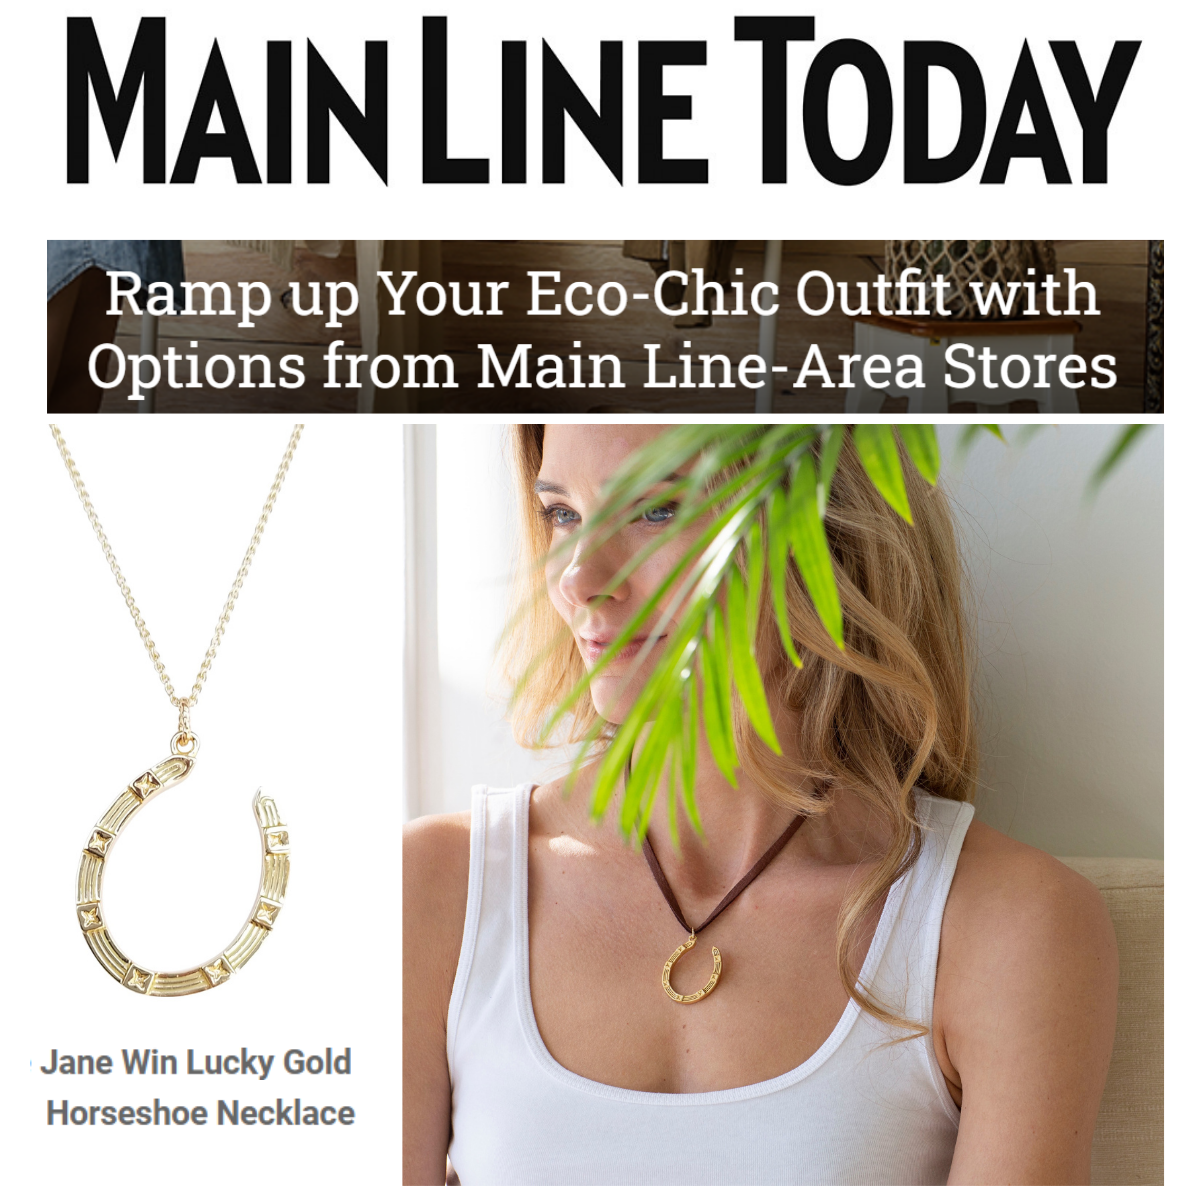 Press Highlight: Main Line Today Ramp Up Your Outfit